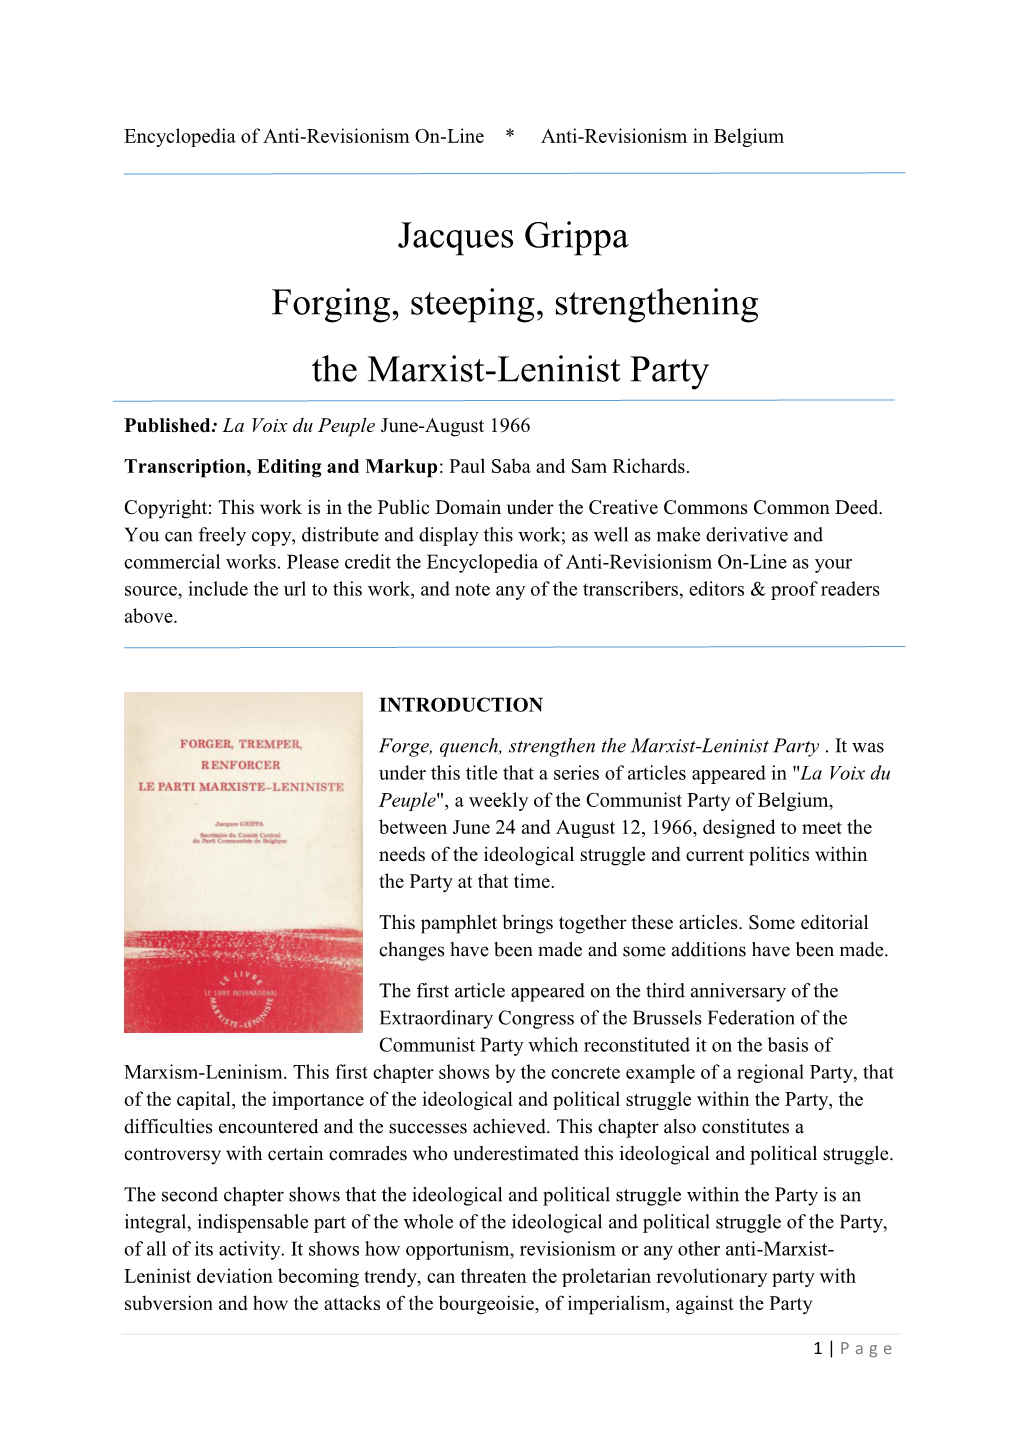 Jacques Grippa Forging, Steeping, Strengthening the Marxist-Leninist Party